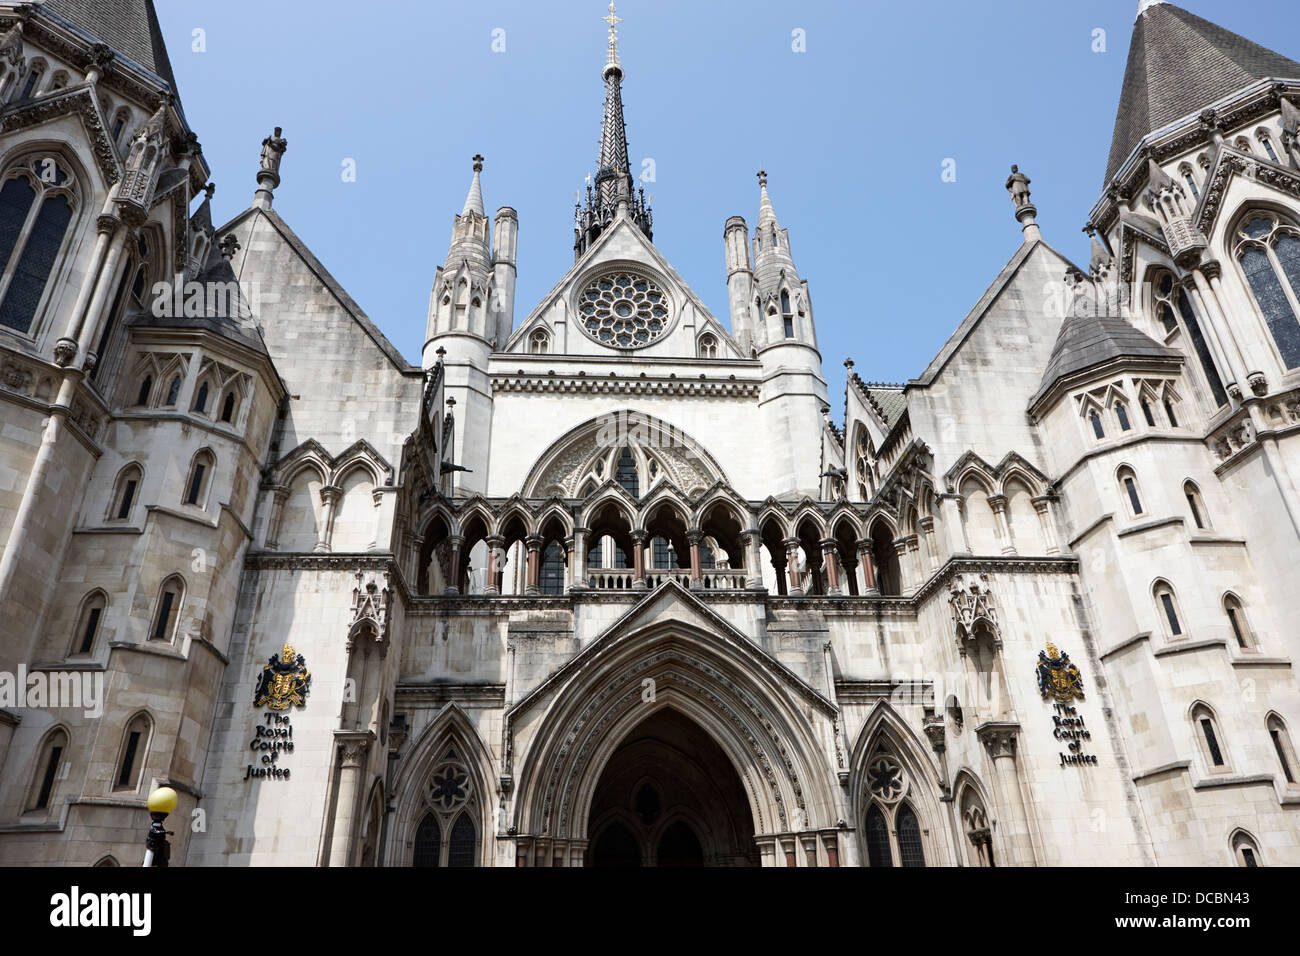 the royal courts of justice law courts central London England UK Stock Photo